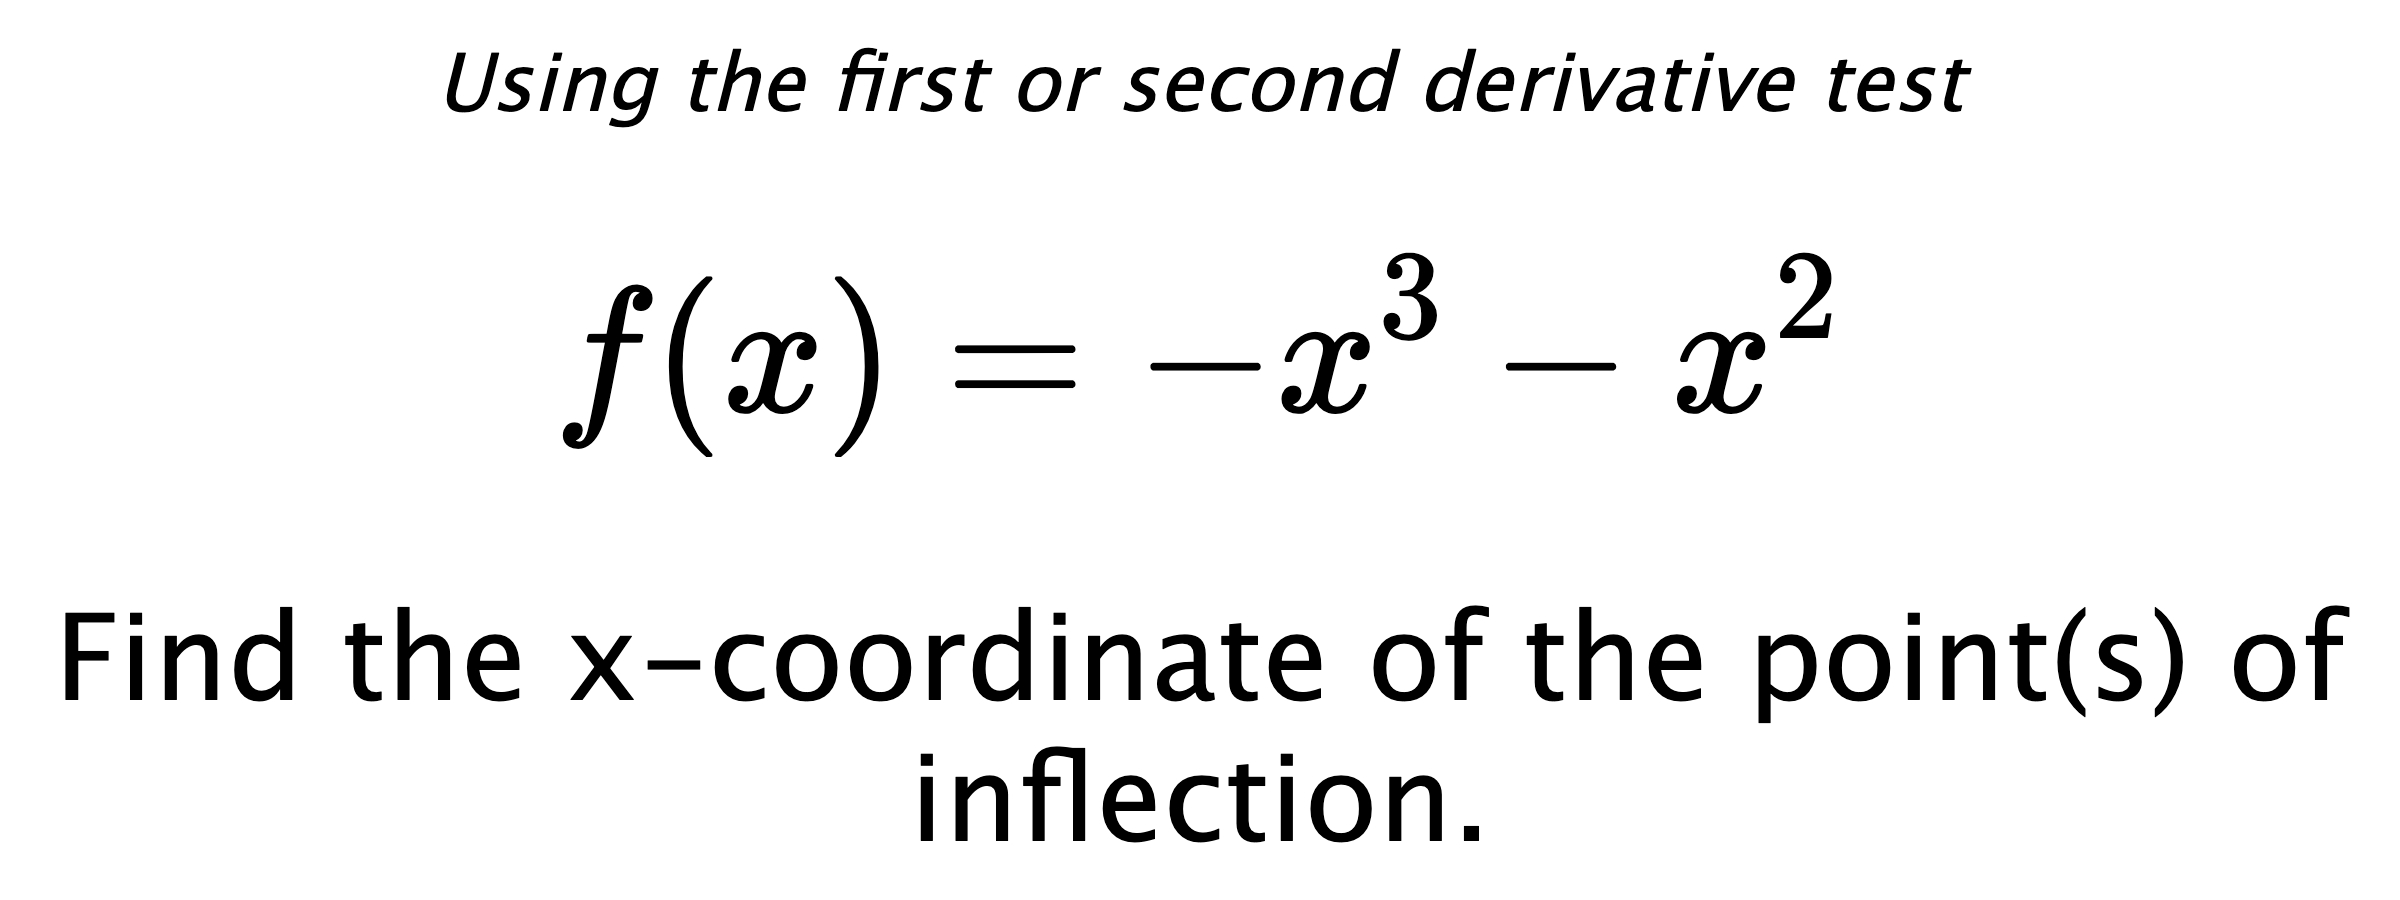 Using the first or second derivative test $$ f(x)=-x^3-x^2 $$ Find the x-coordinate of the point(s) of inflection.